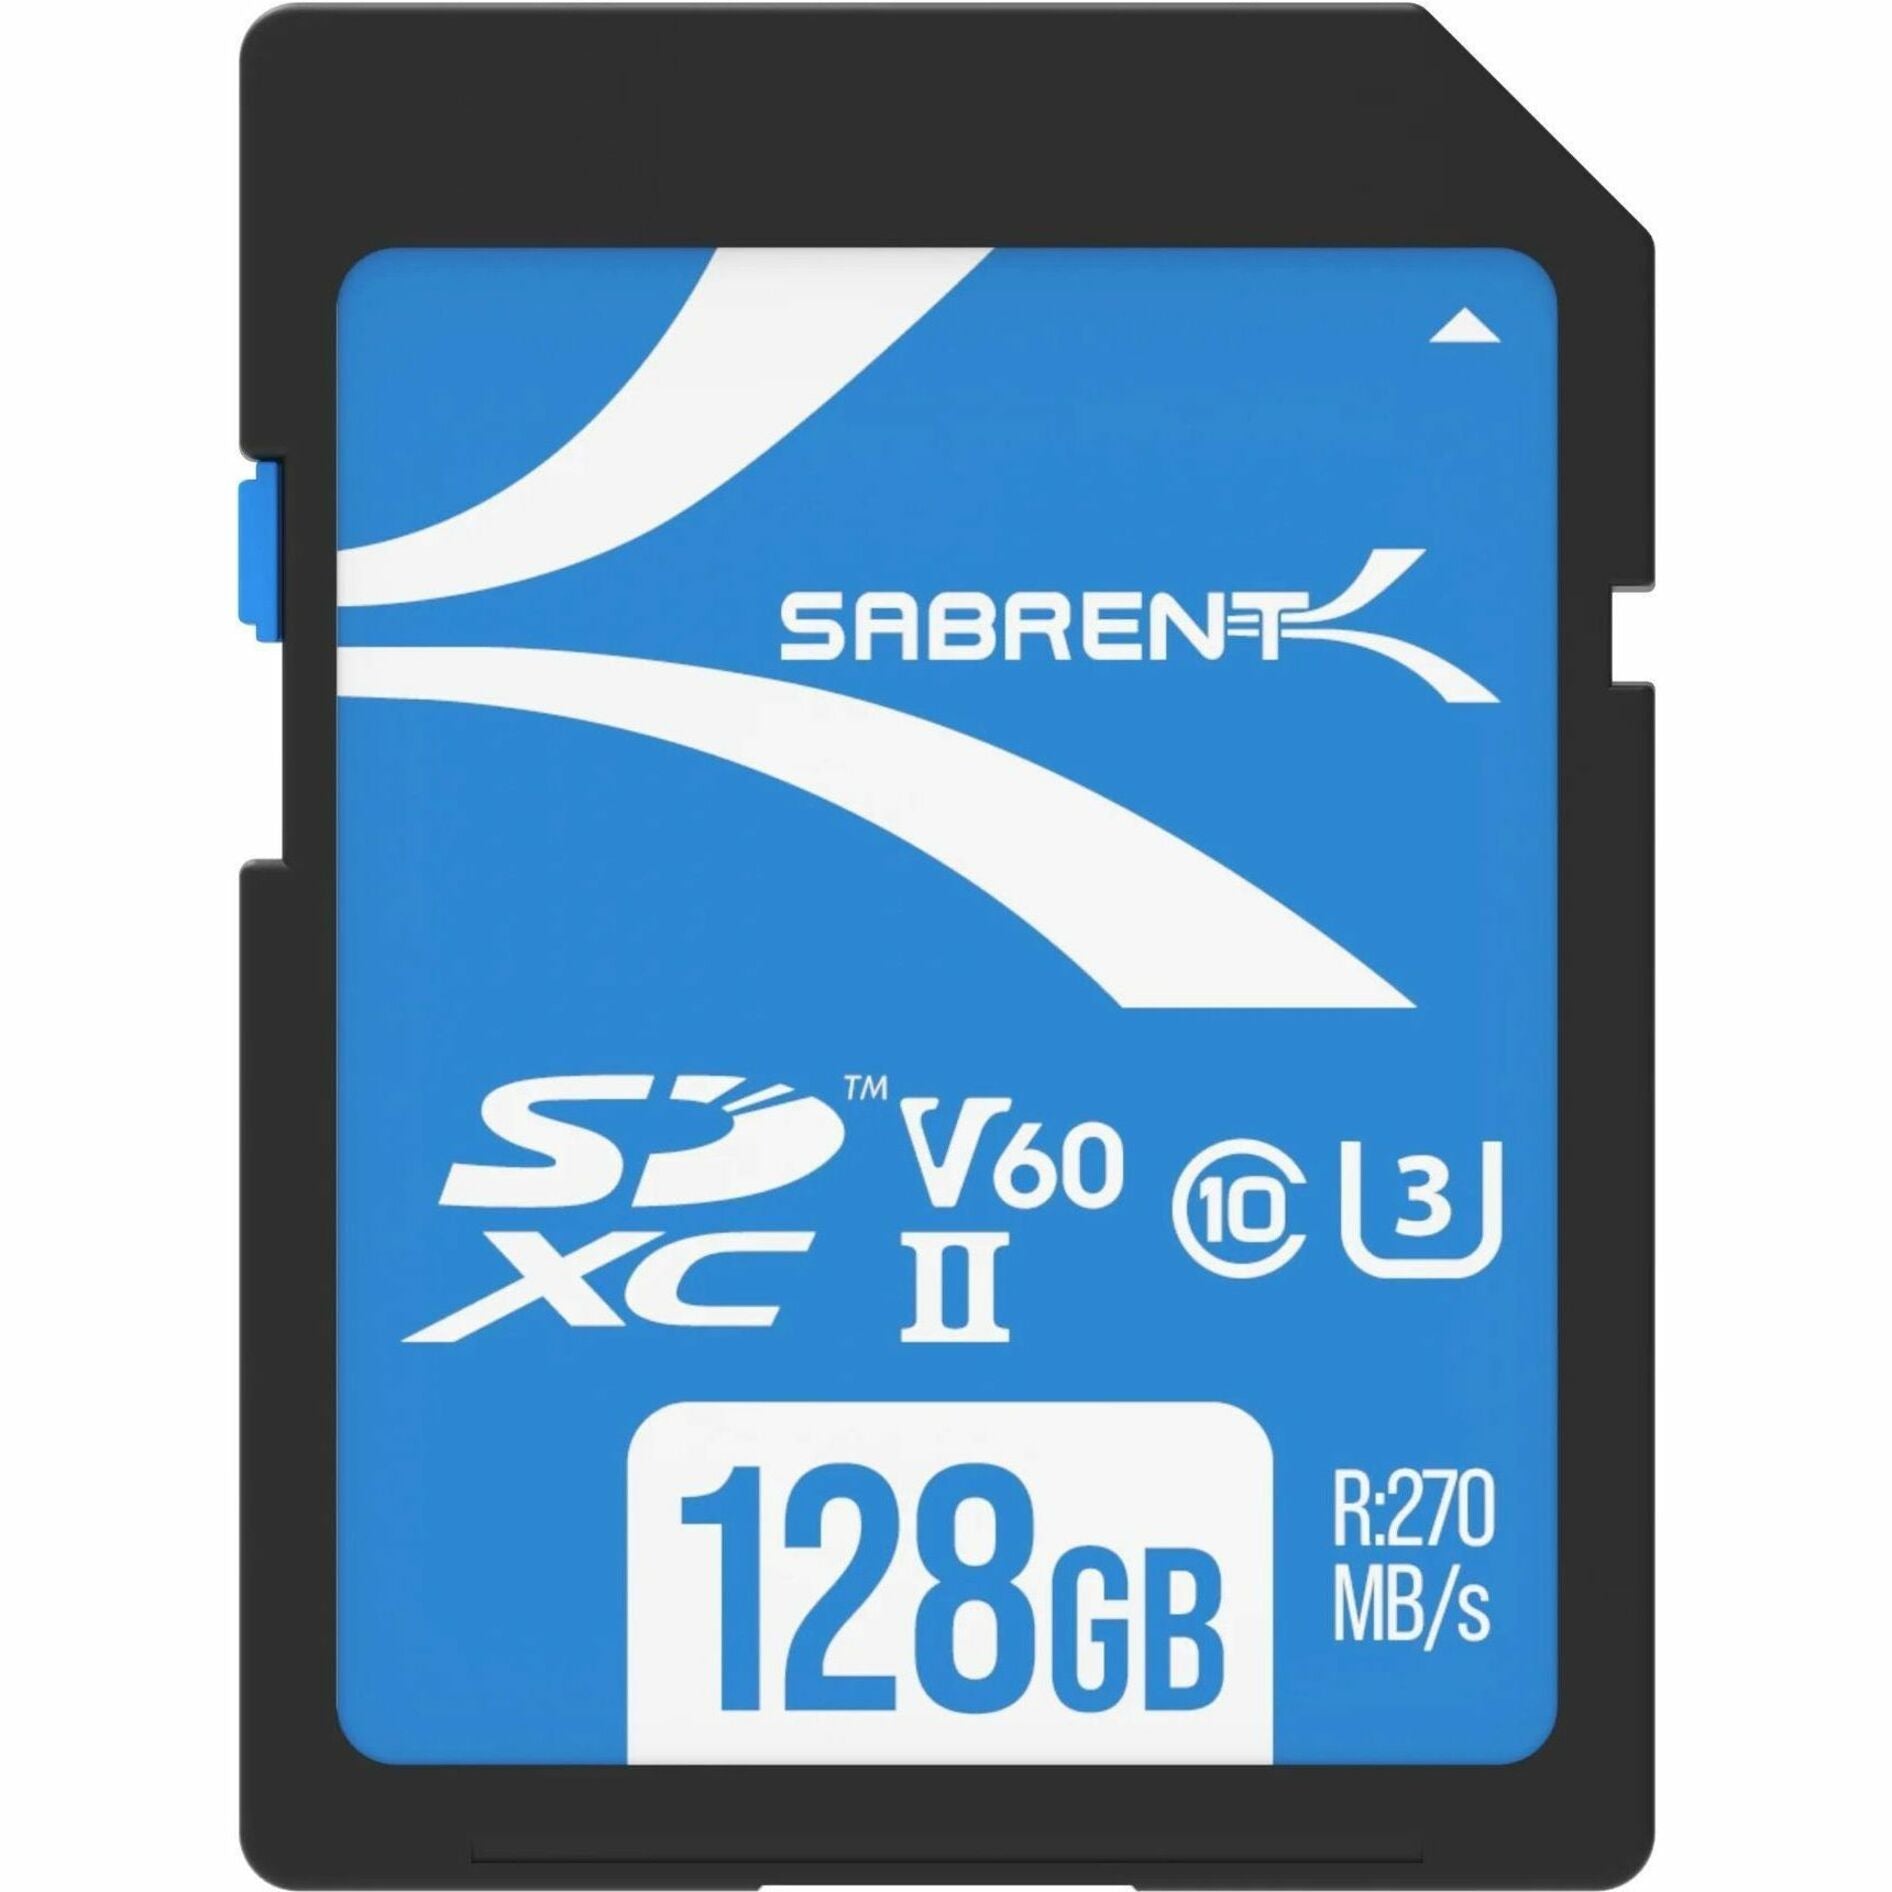 Sabrent SD-TL60-128GB Rocket V60 SD UHS-II Memory Card, 128GB, Read Speed 270MB/s, Write Speed 170MB/s